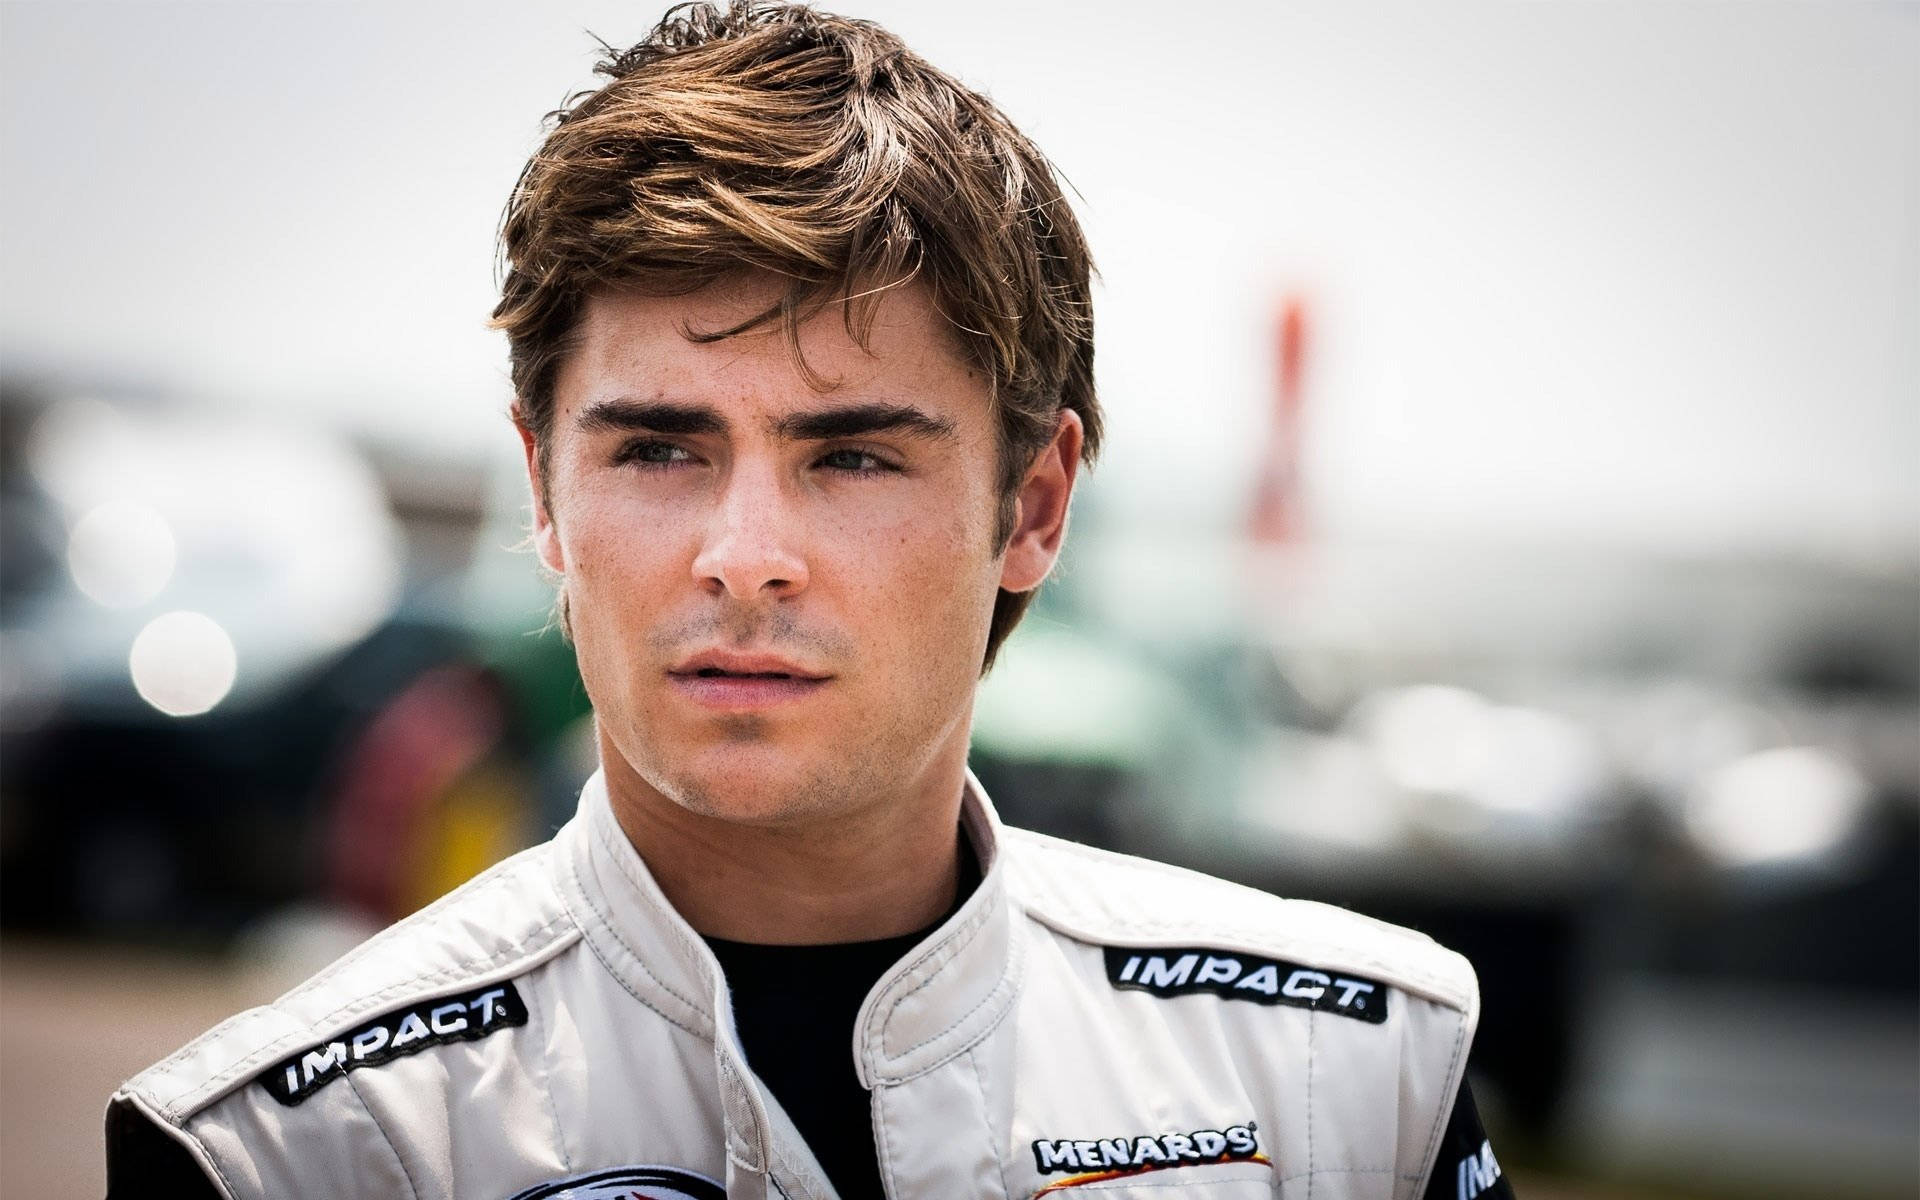 Zac Efron Wearing A Racing Suit